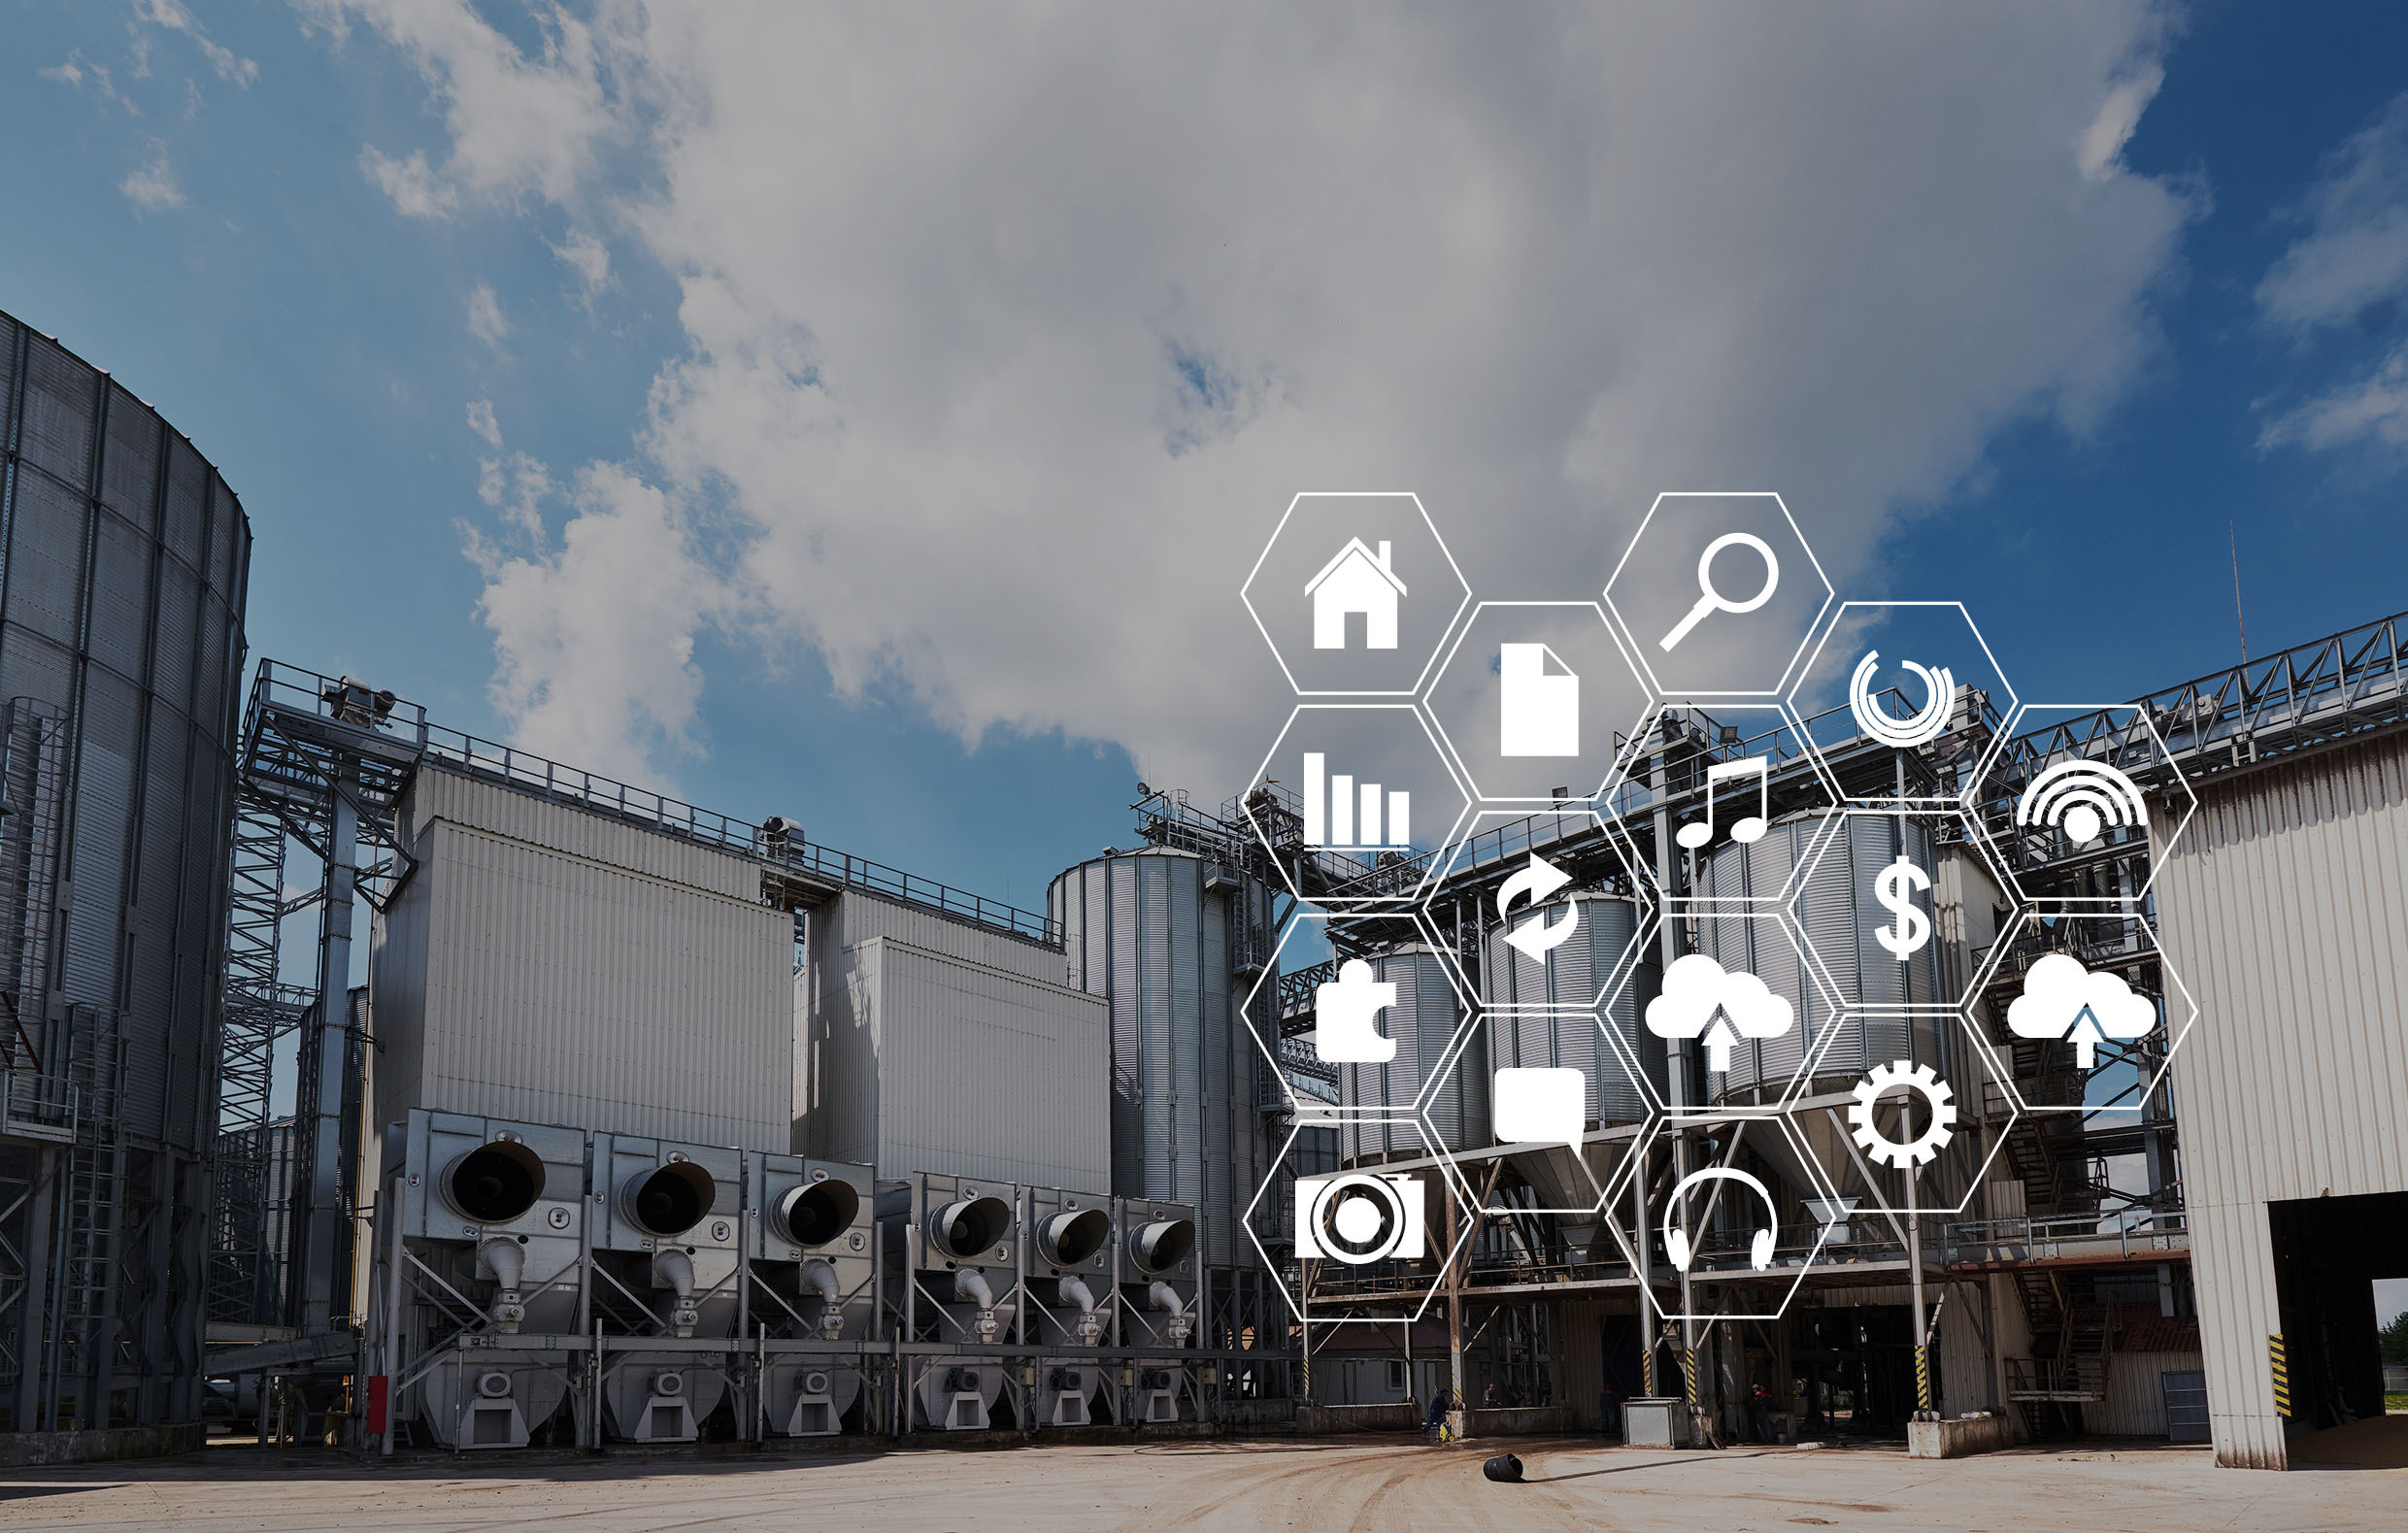 The Industrial Internet of Things